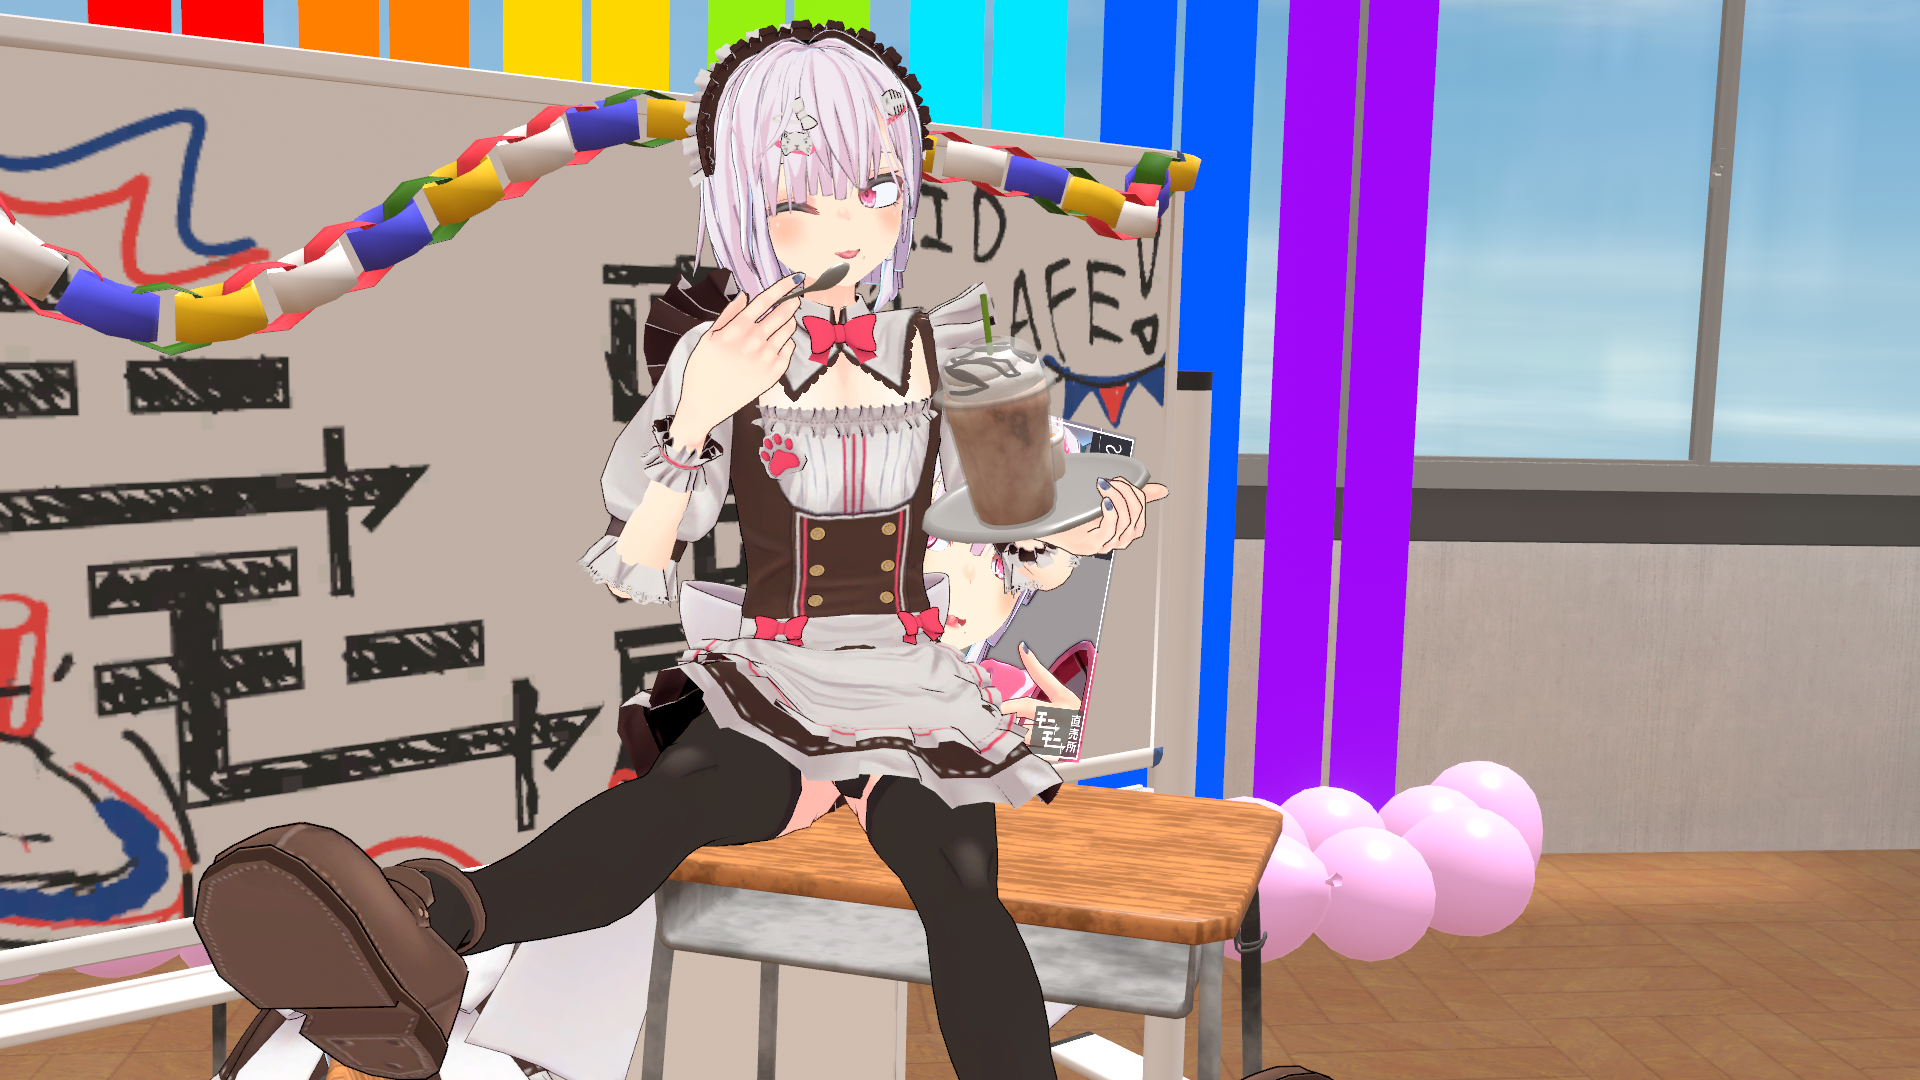 VRChat_1920x1080_2021-12-05_01-29-57.731.png